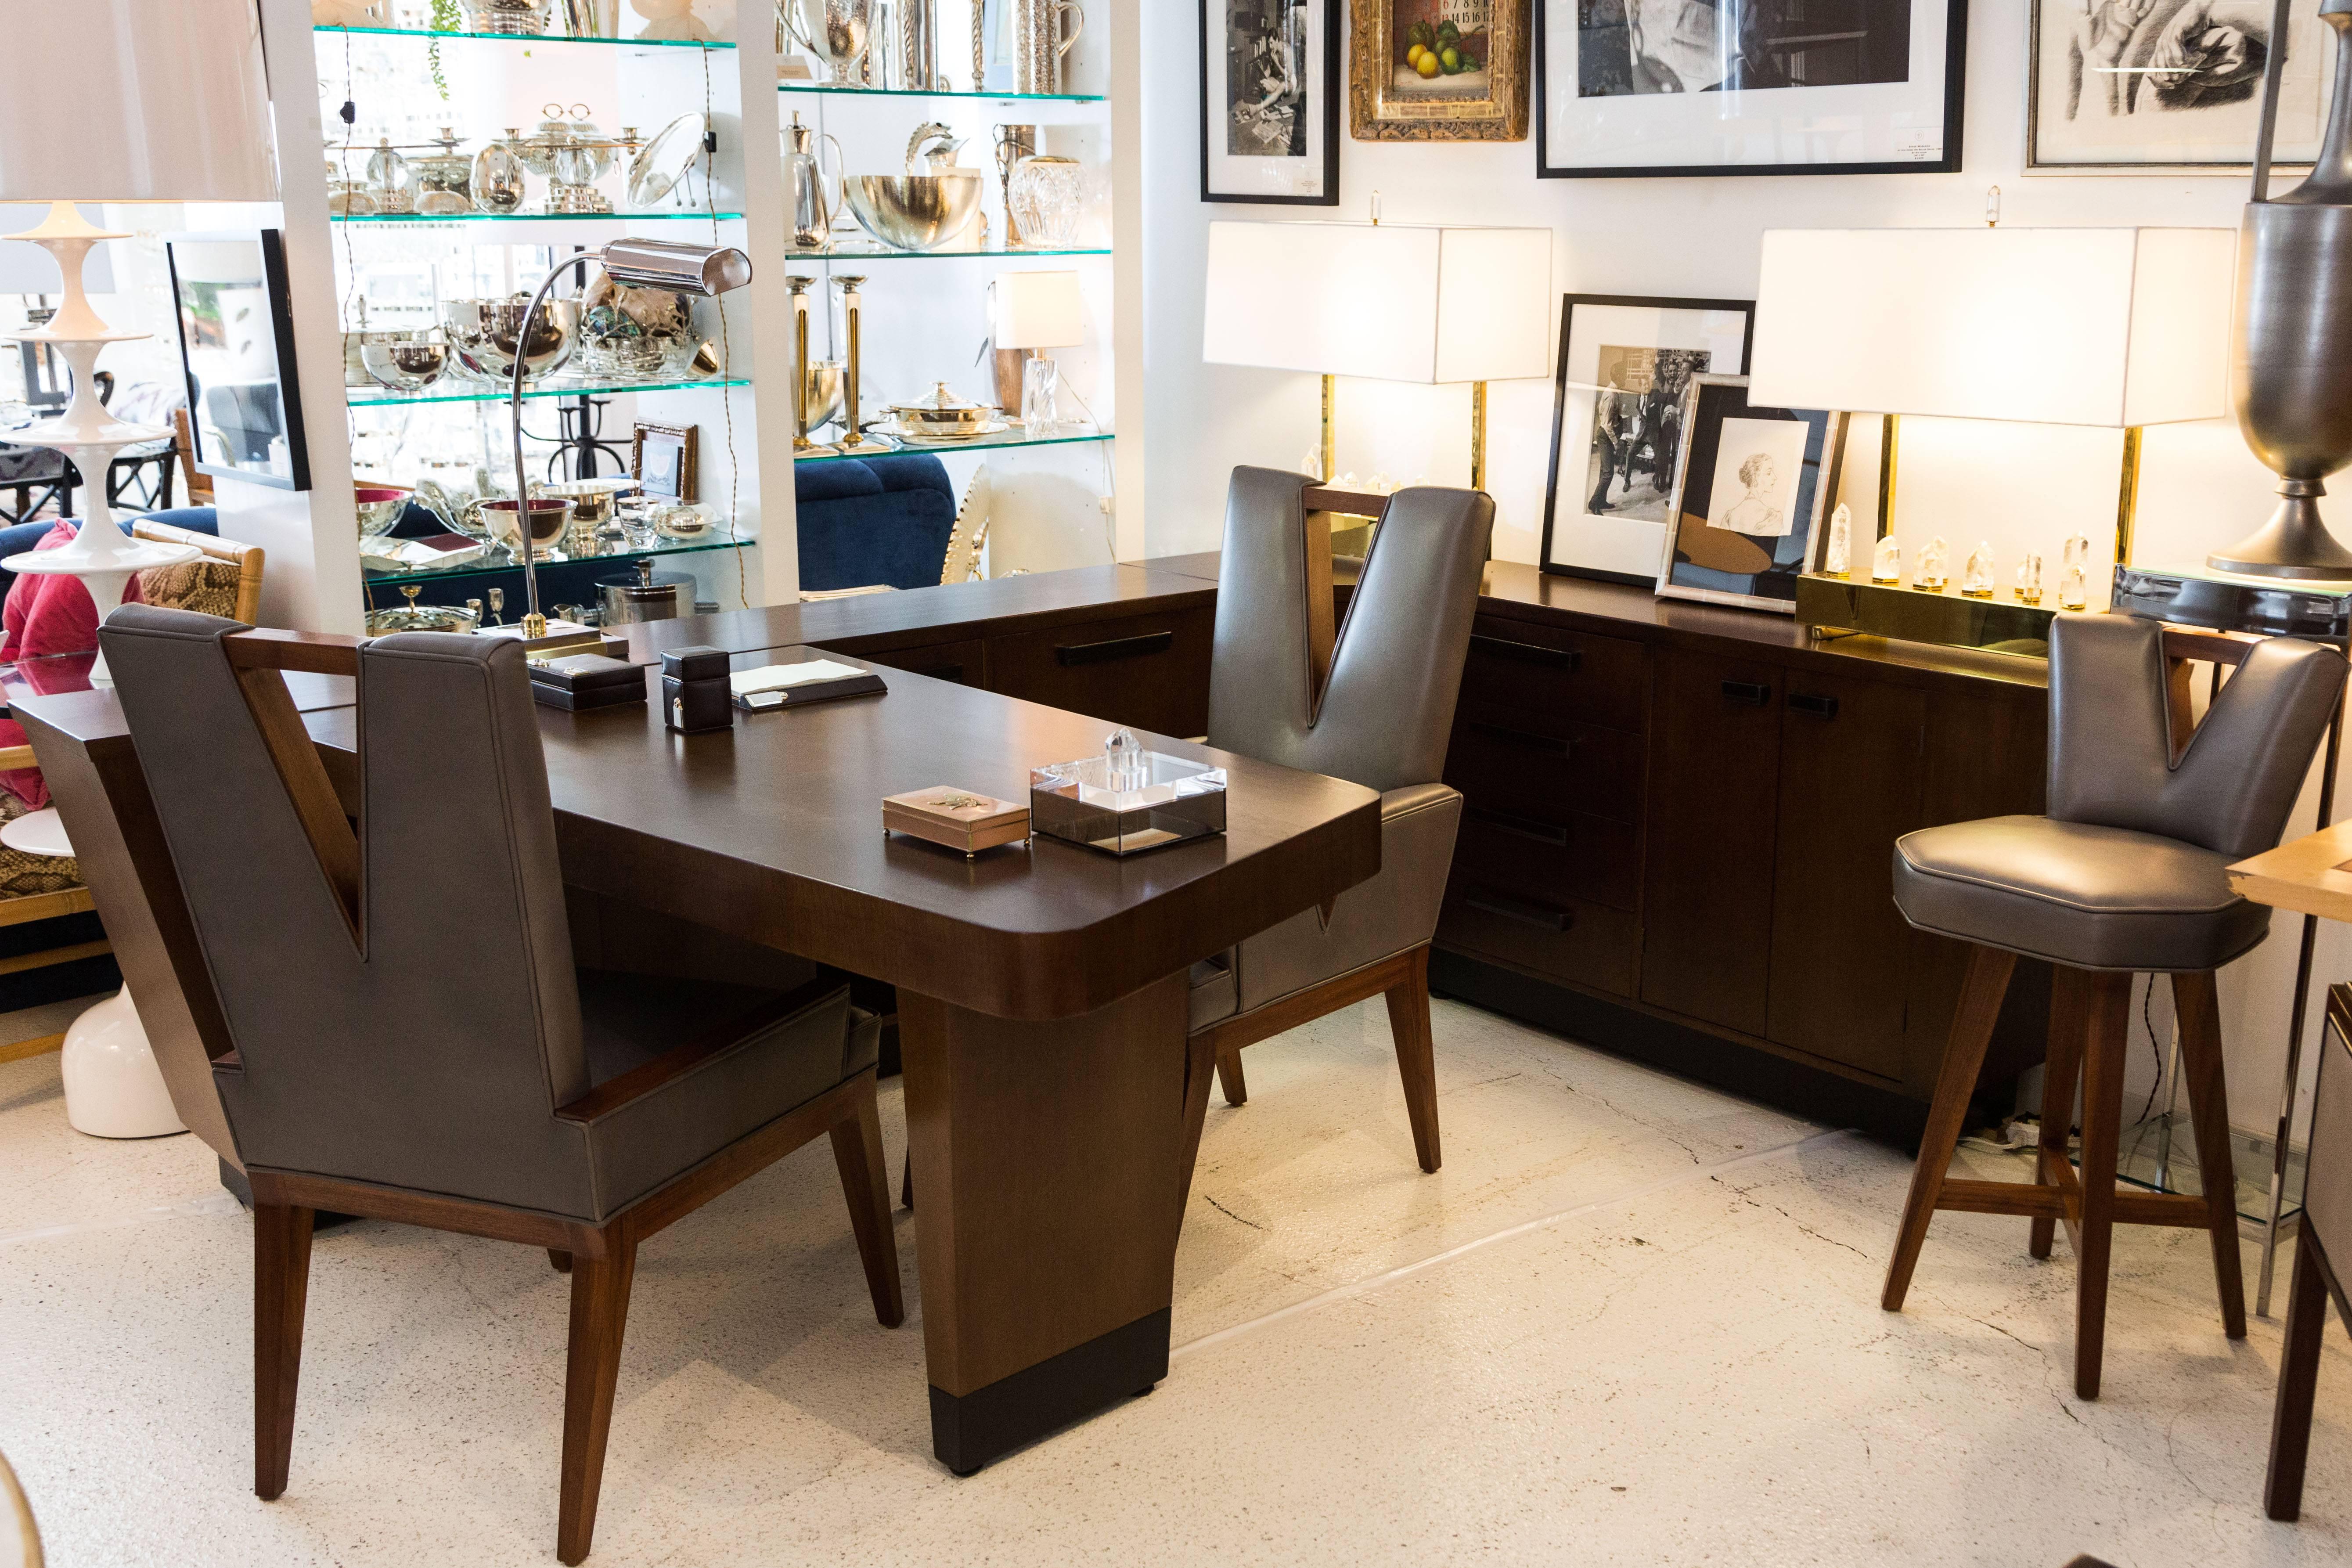 This is a unique opportunity to own a beautiful and unique desk with intergraded wrap around console. The desk et al has been completely restored to its former glory. The cabinet that surrounds the user is outfitted with both drawers and doors